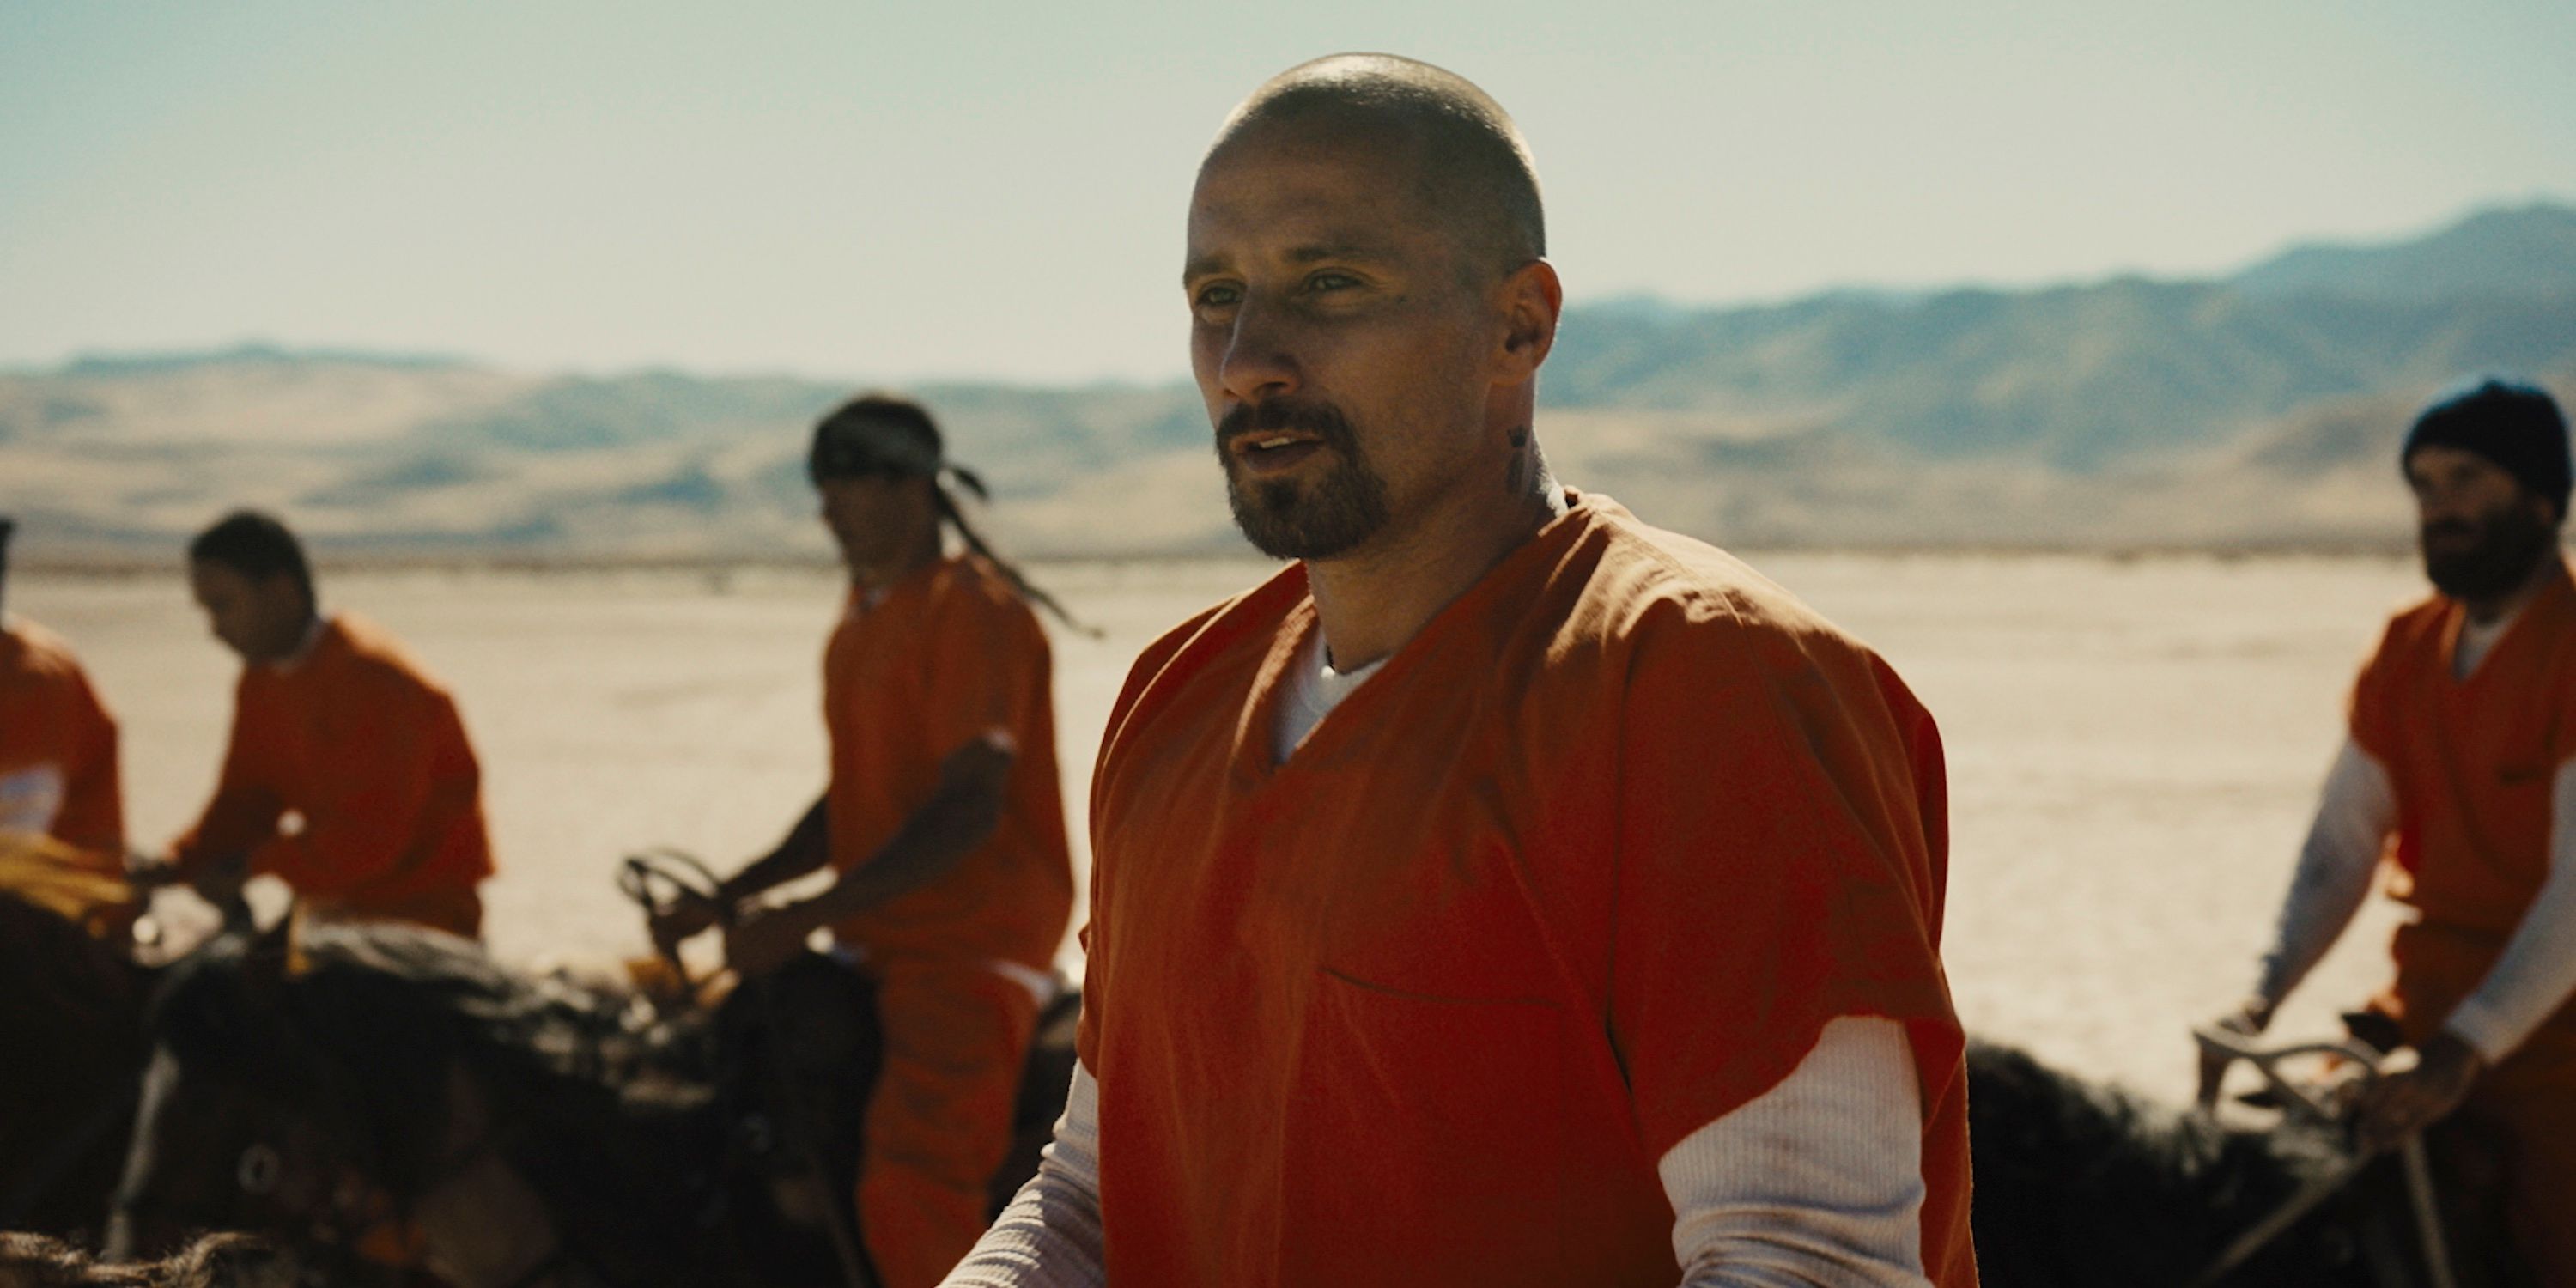 Matthias Schoenaerts and a group of men dressed in prison uniforms riding horses in The Mustang